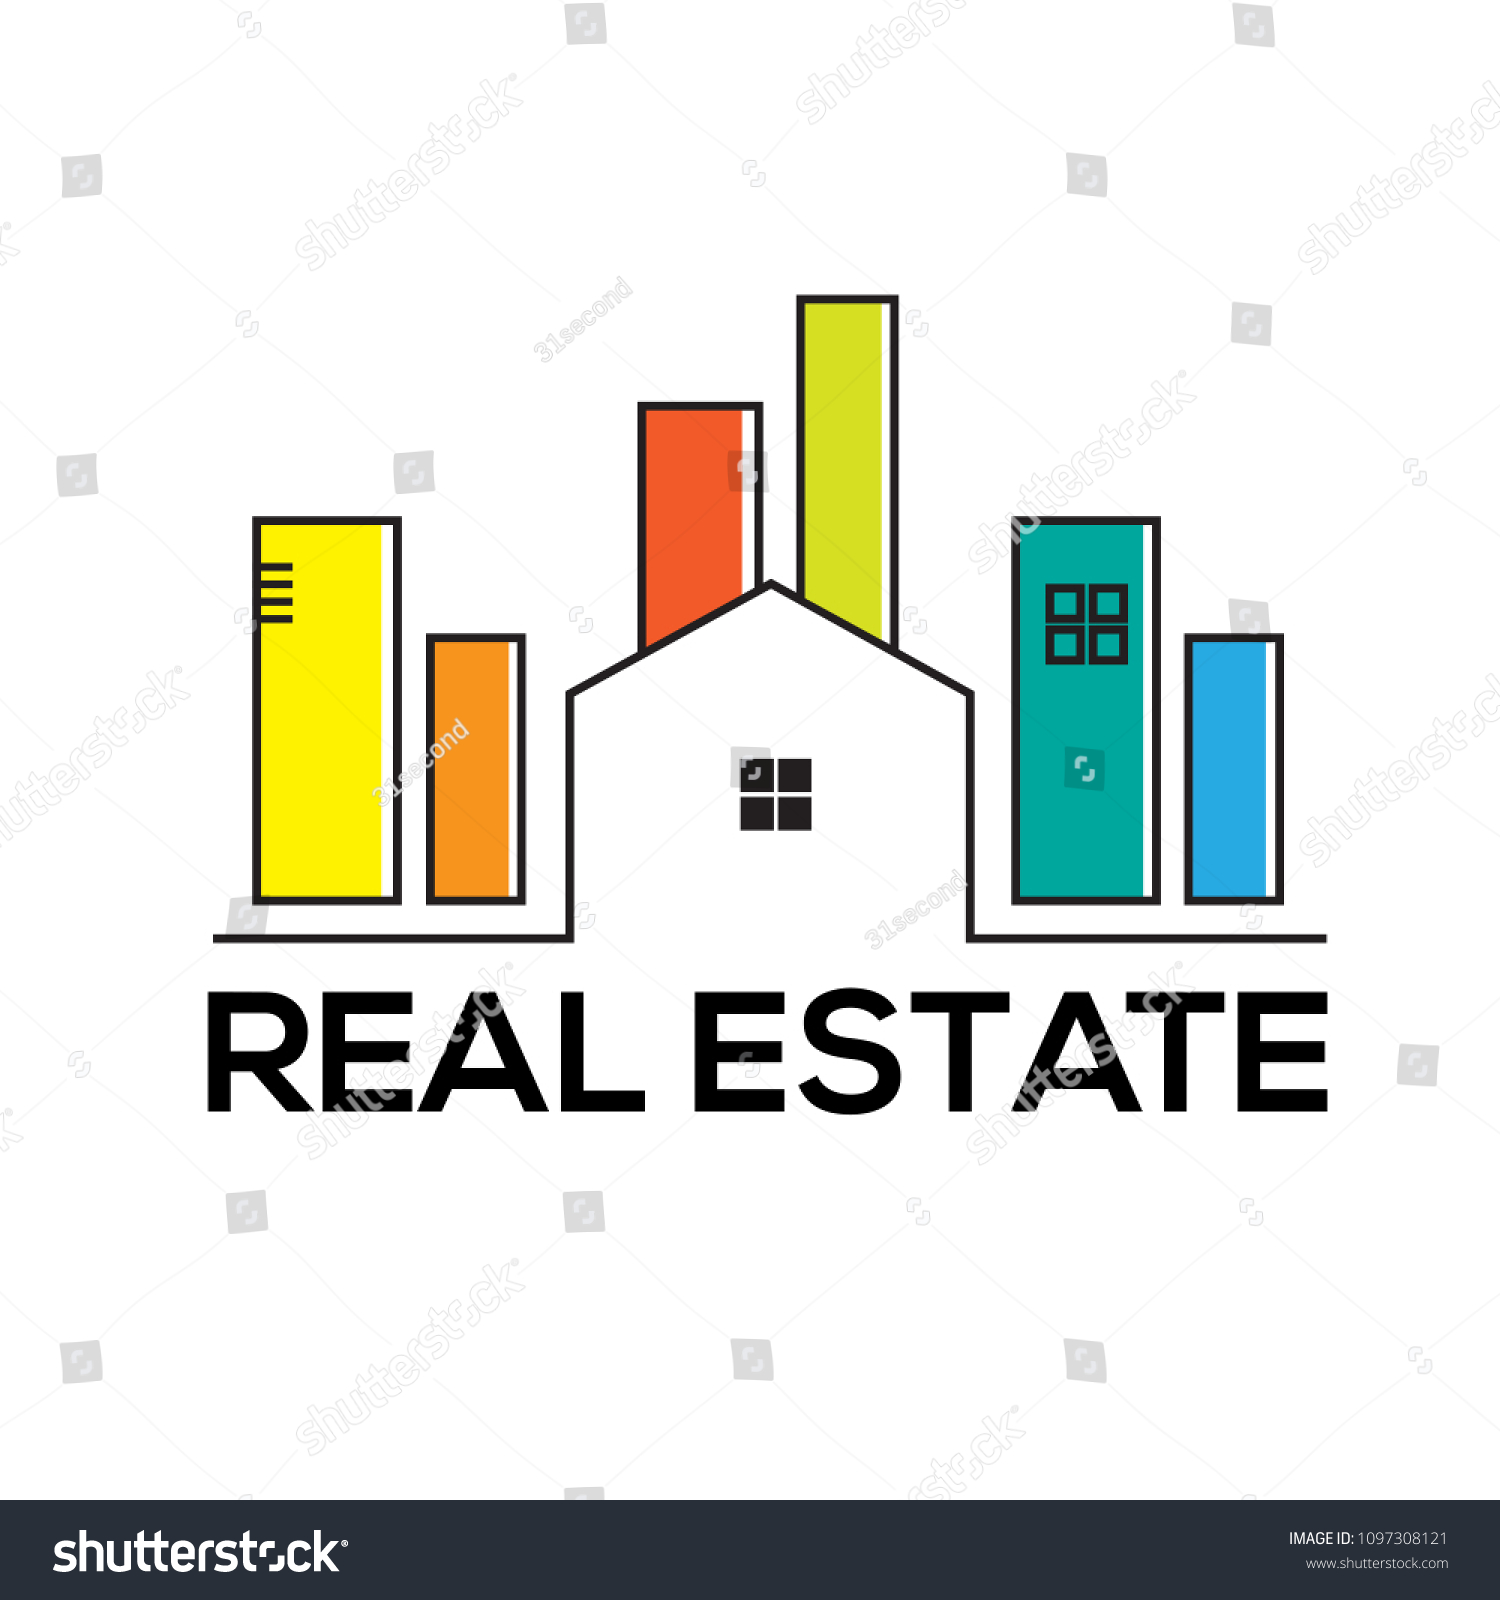 Colorful Real Estate Logo Designs Business Stock Vector Royalty Free 1097308121 Shutterstock 2894